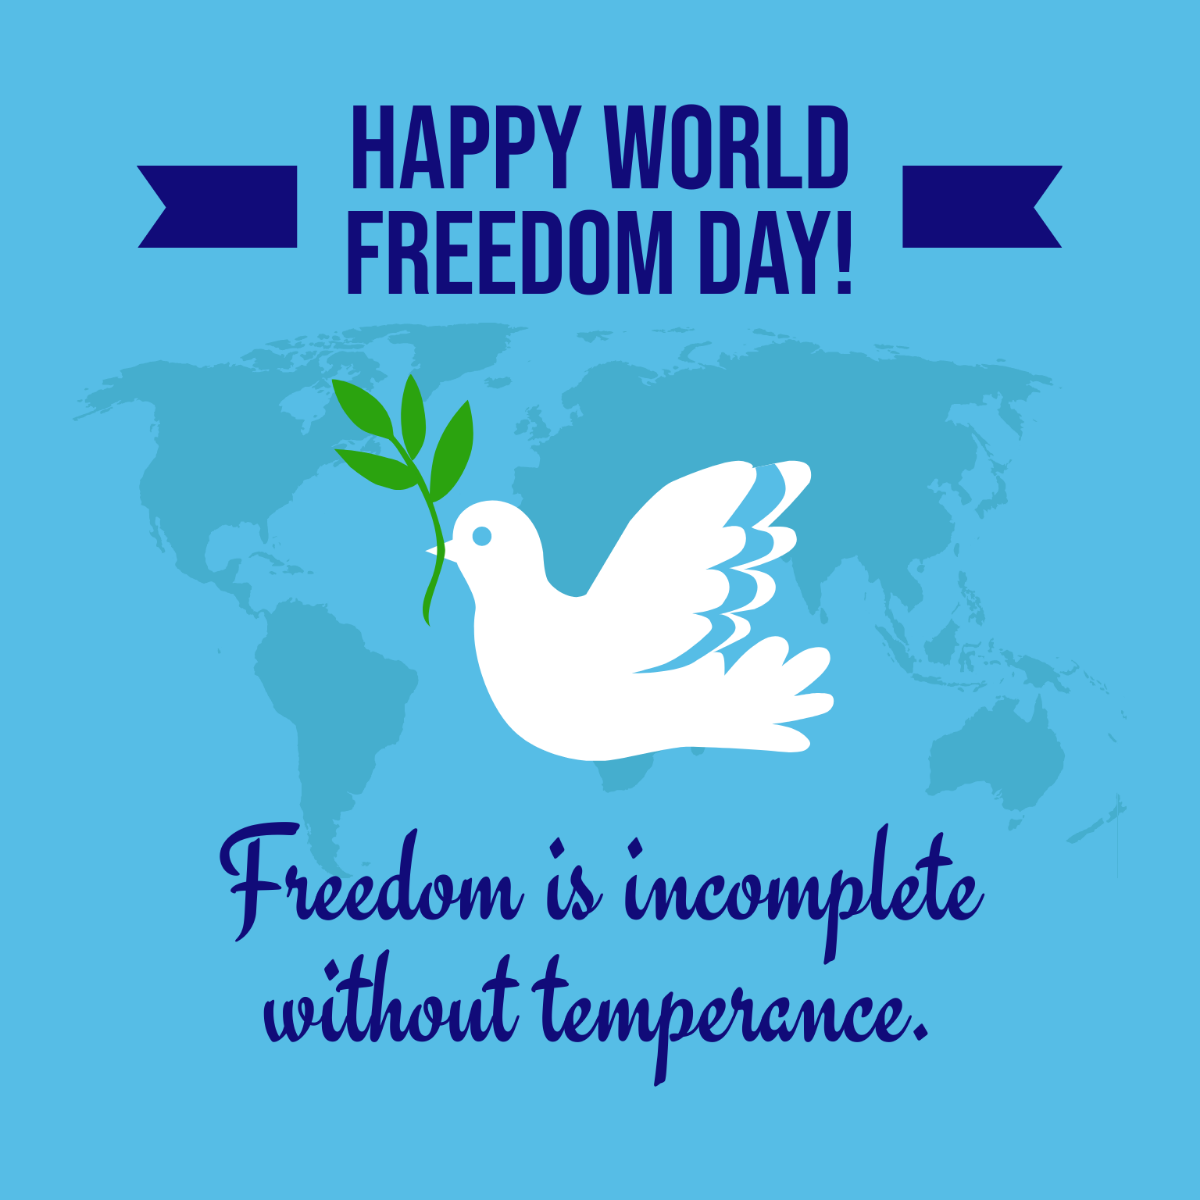 World Freedom Day Greeting Card Vector